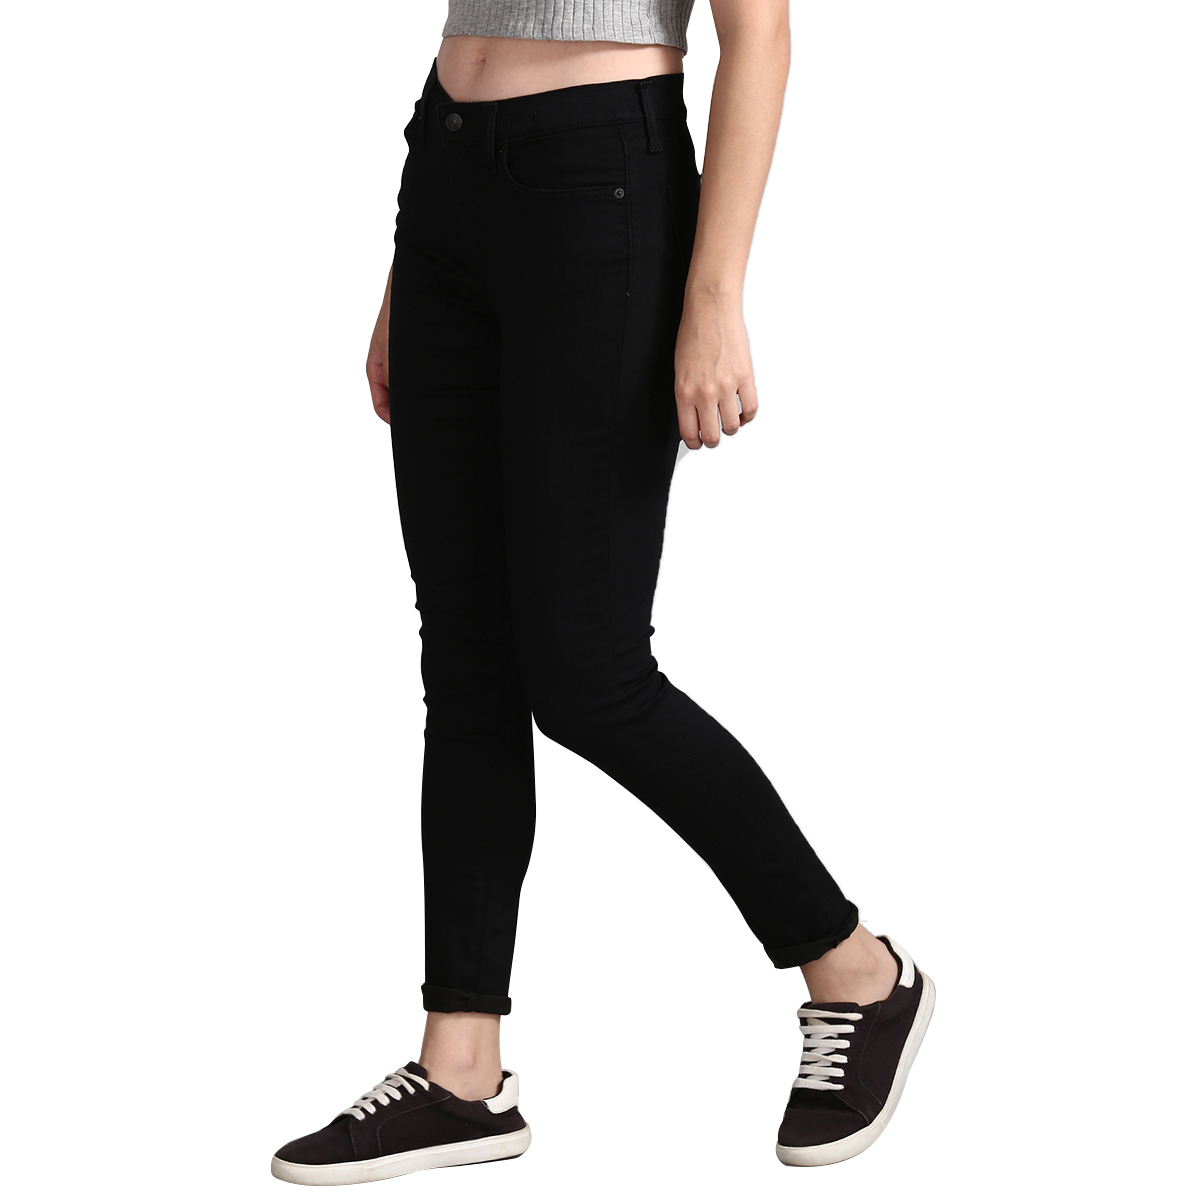 Gap Mid Rise Skinny Fit Full Length Solid Color Jeans - Black